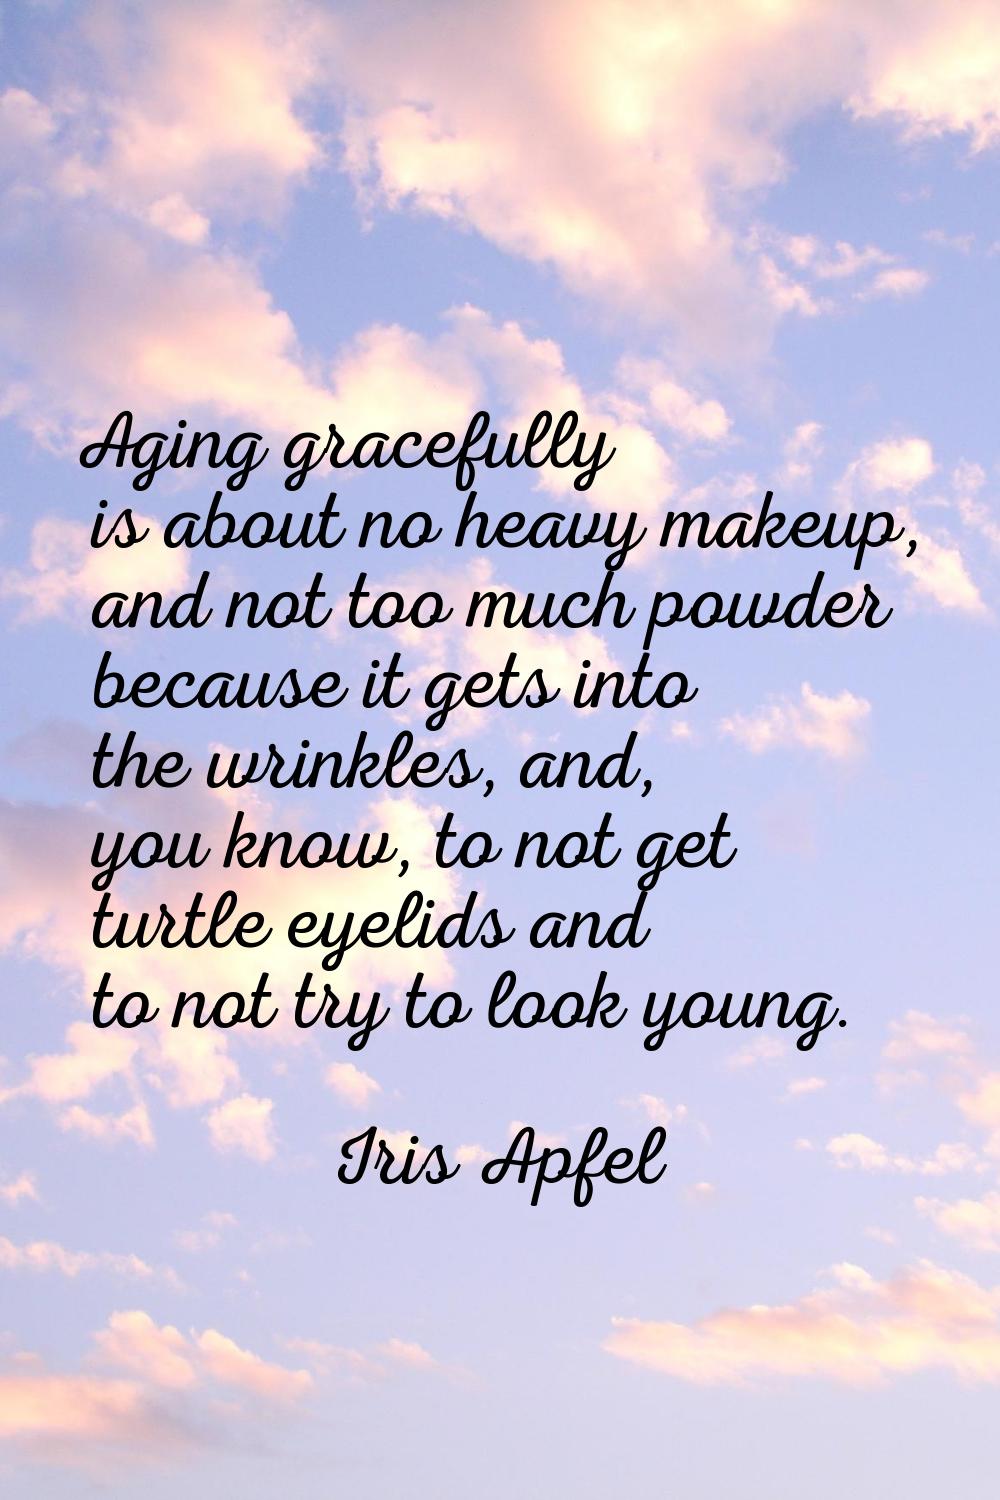 Aging gracefully is about no heavy makeup, and not too much powder because it gets into the wrinkle